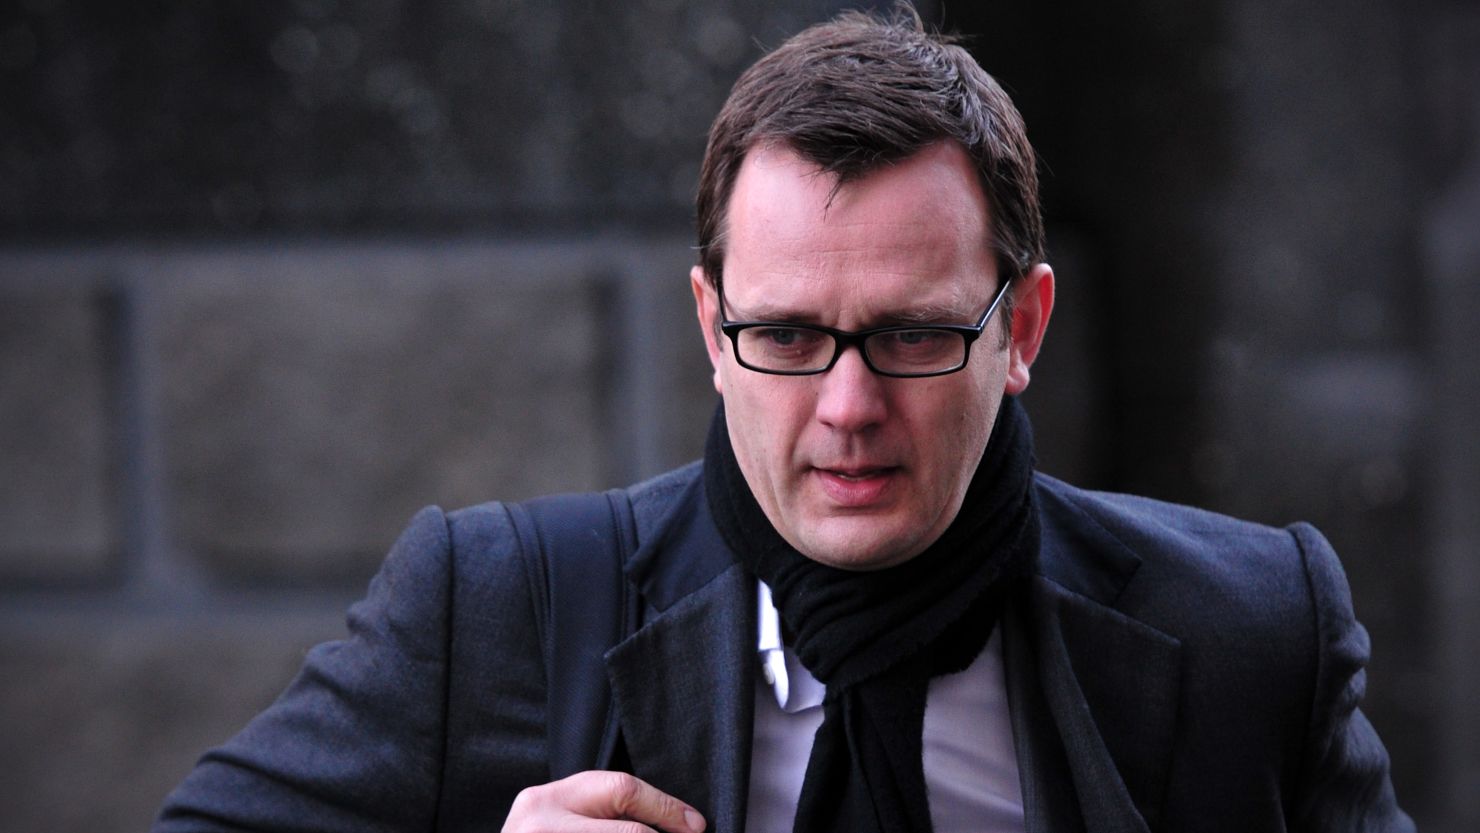 Andy Coulson arrives at the phone-hacking trial at the Old Bailey court in London on January 27, 2014.